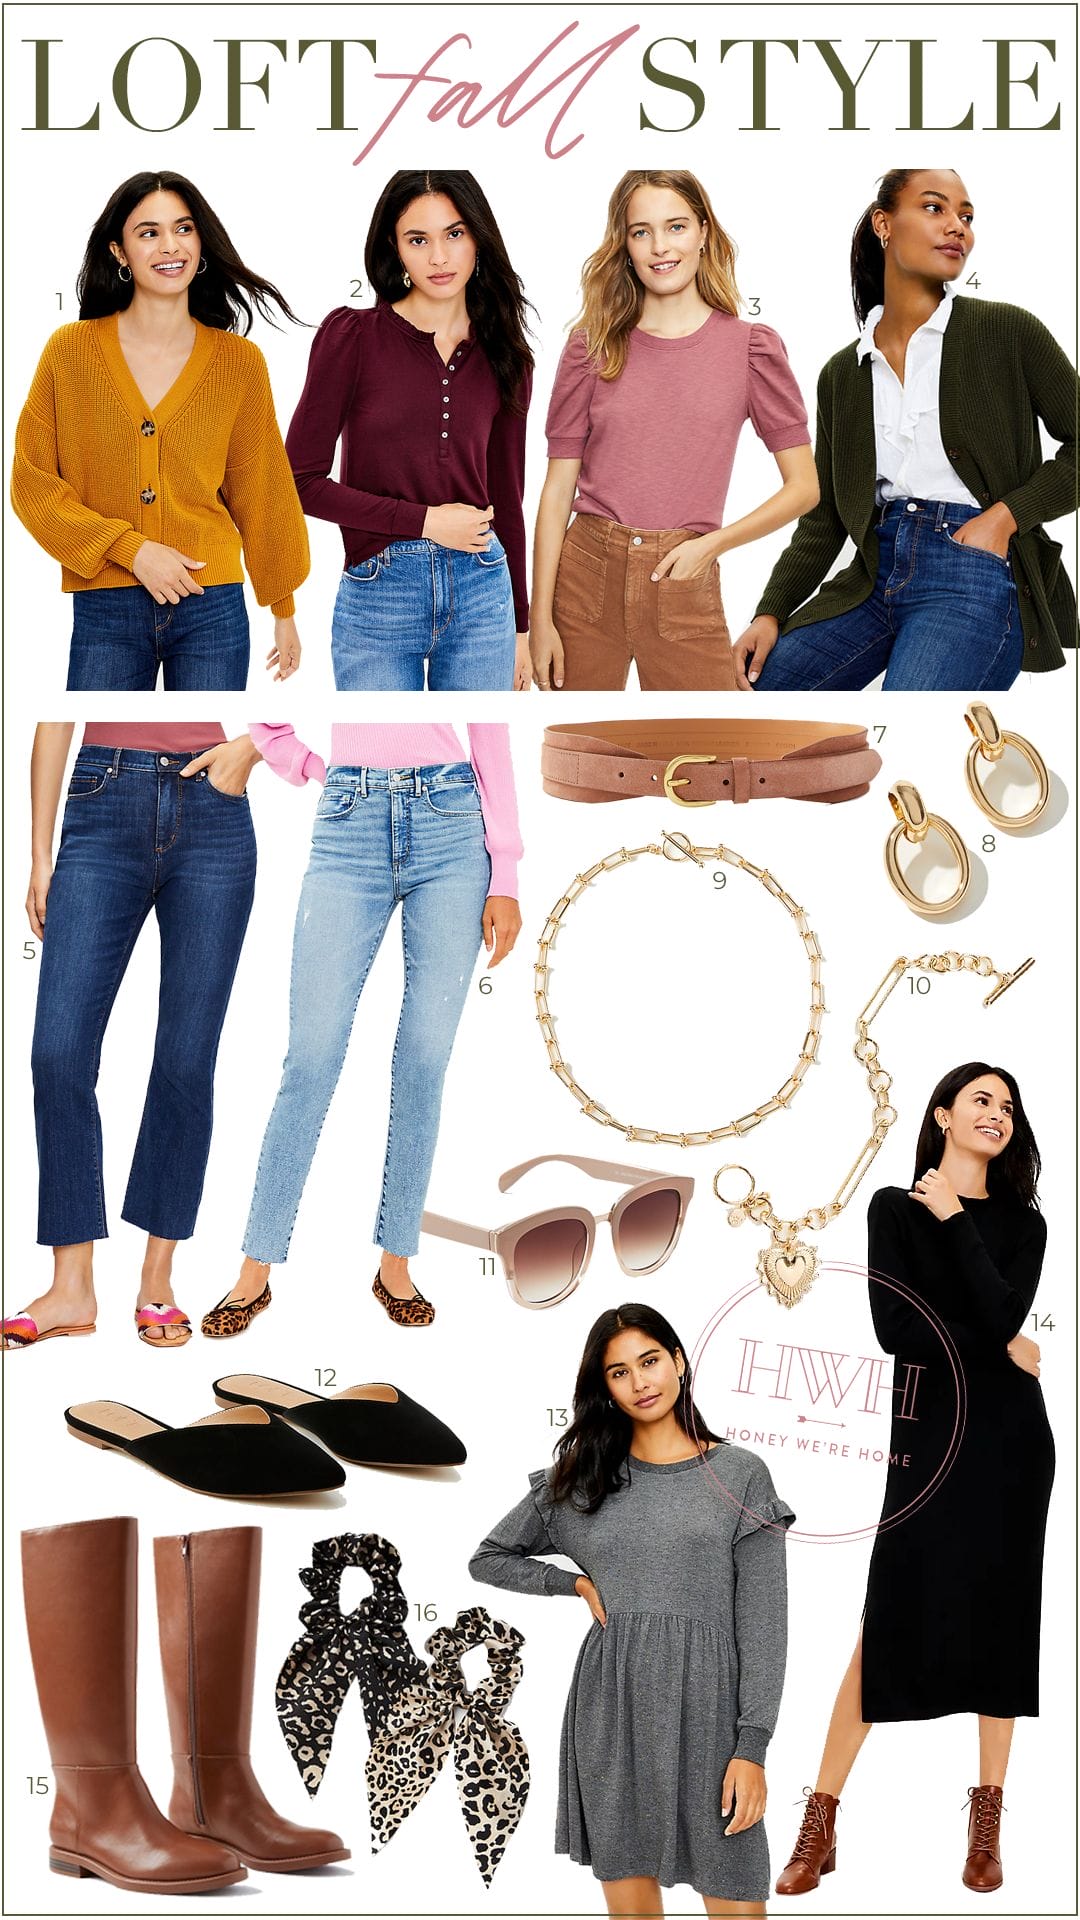 LOFT Plus Size Clothes Now In Stores - Fall Style Guide